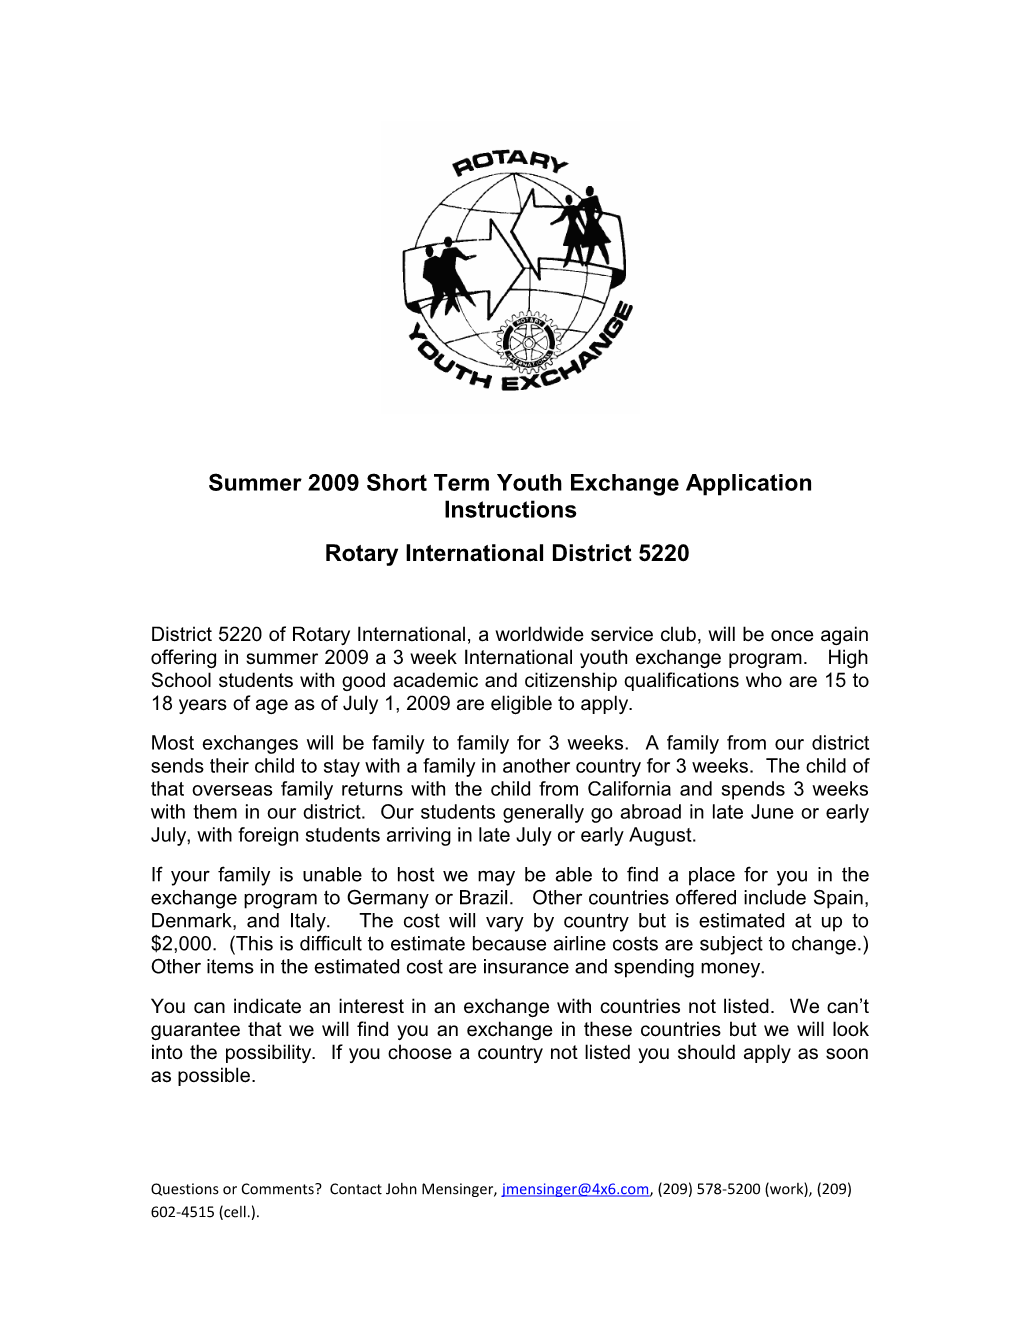 Summer 2009 Short Term Youth Exchange Application Instructions